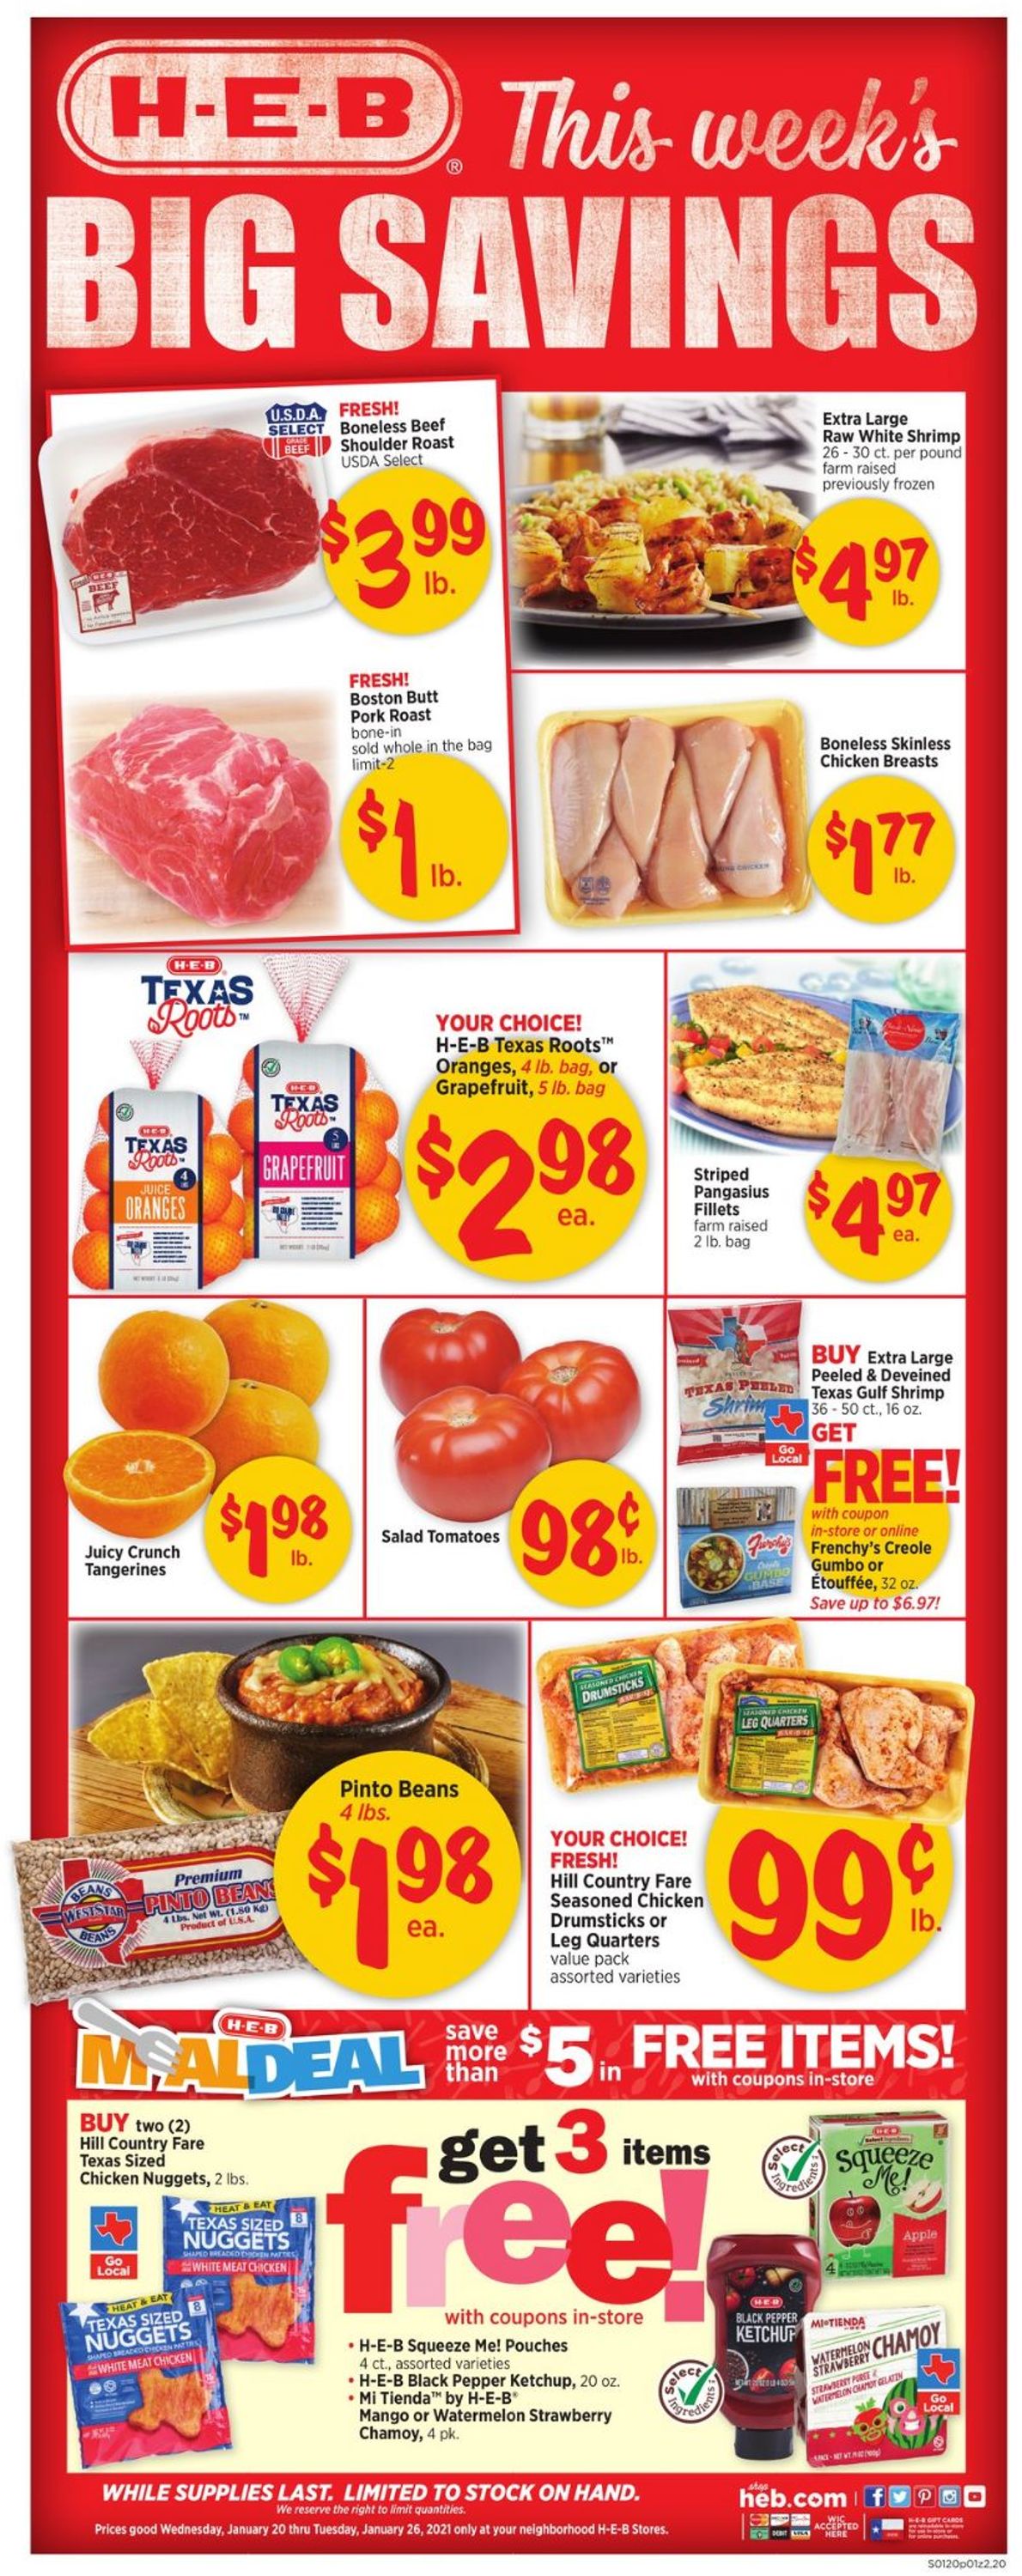 H-E-B Current weekly ad 01/20 - 01/26/2021 - frequent-ads.com